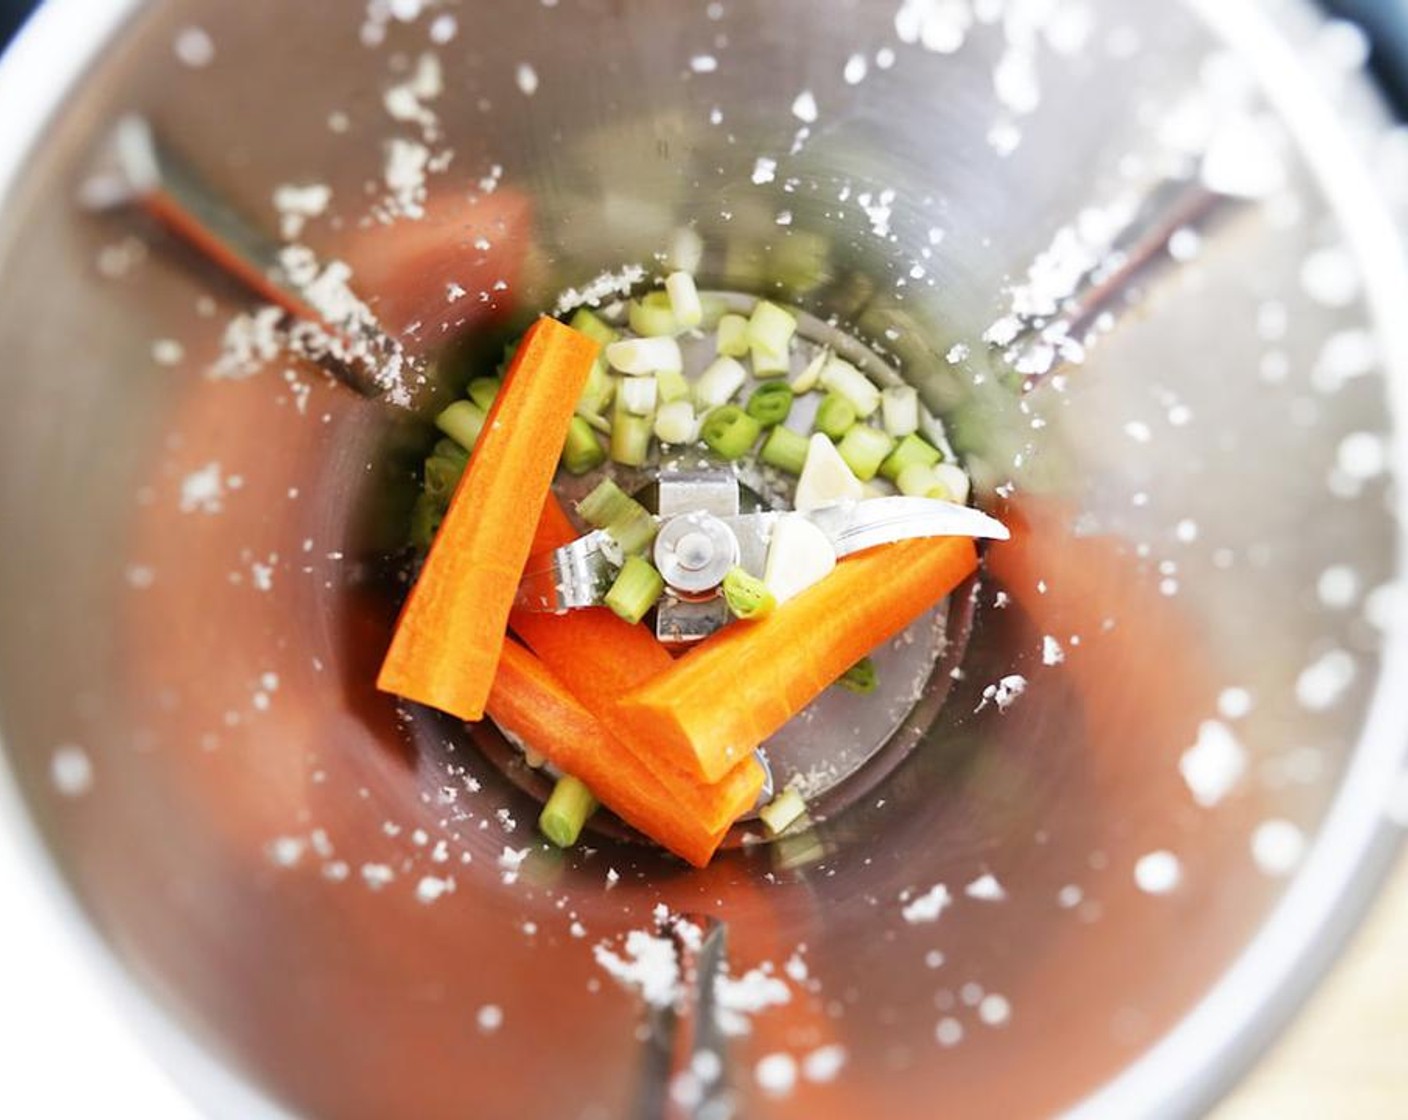 step 2 Add the Carrot (1/2), Garlic (1 clove), and white part of the Scallions (2) to the Thermomix and blend on speed 5 for 5 seconds.